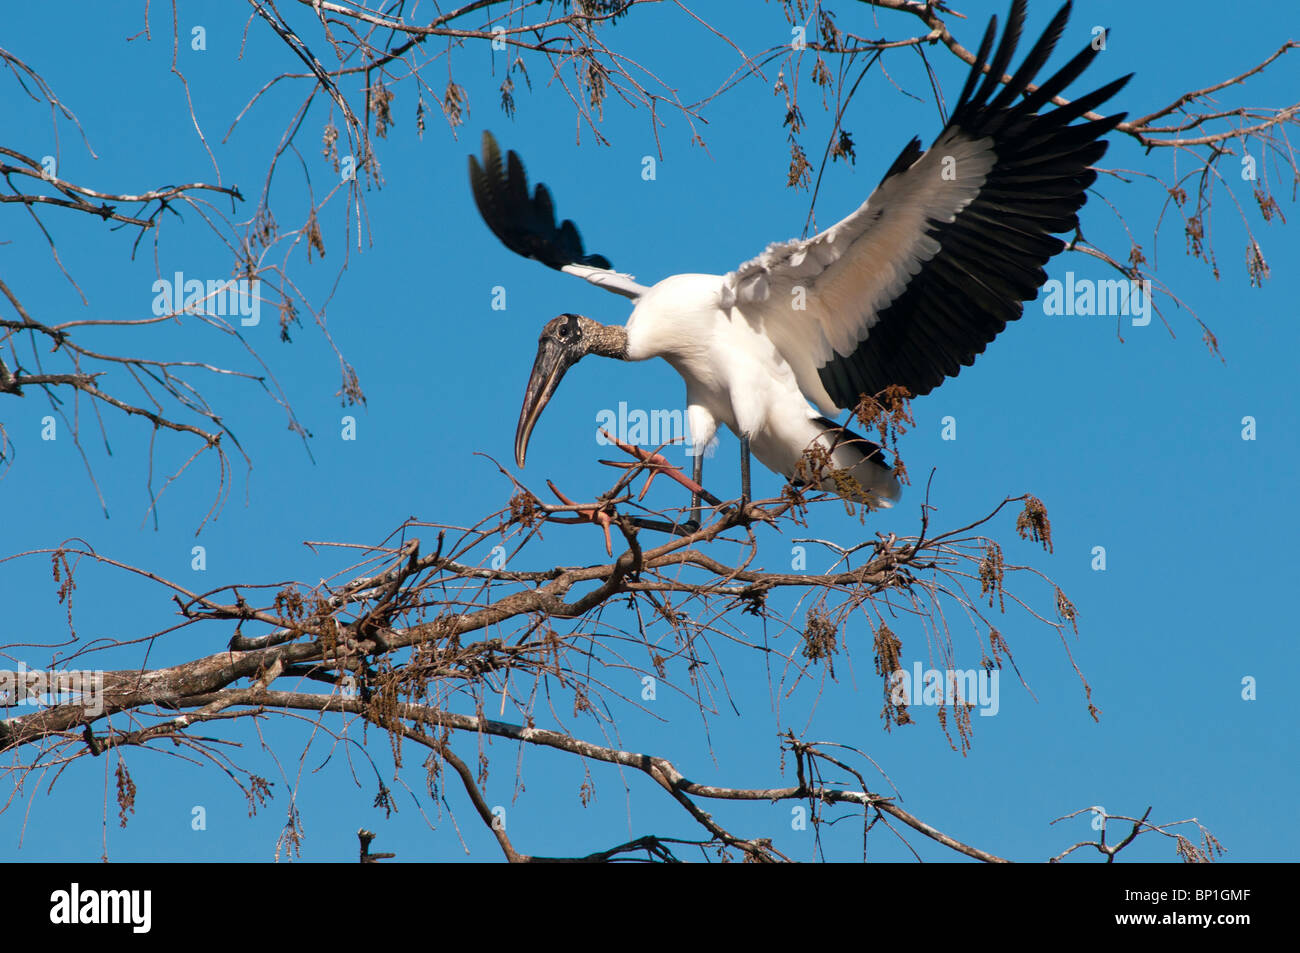 Wood Stork lands in tree. Stock Photo